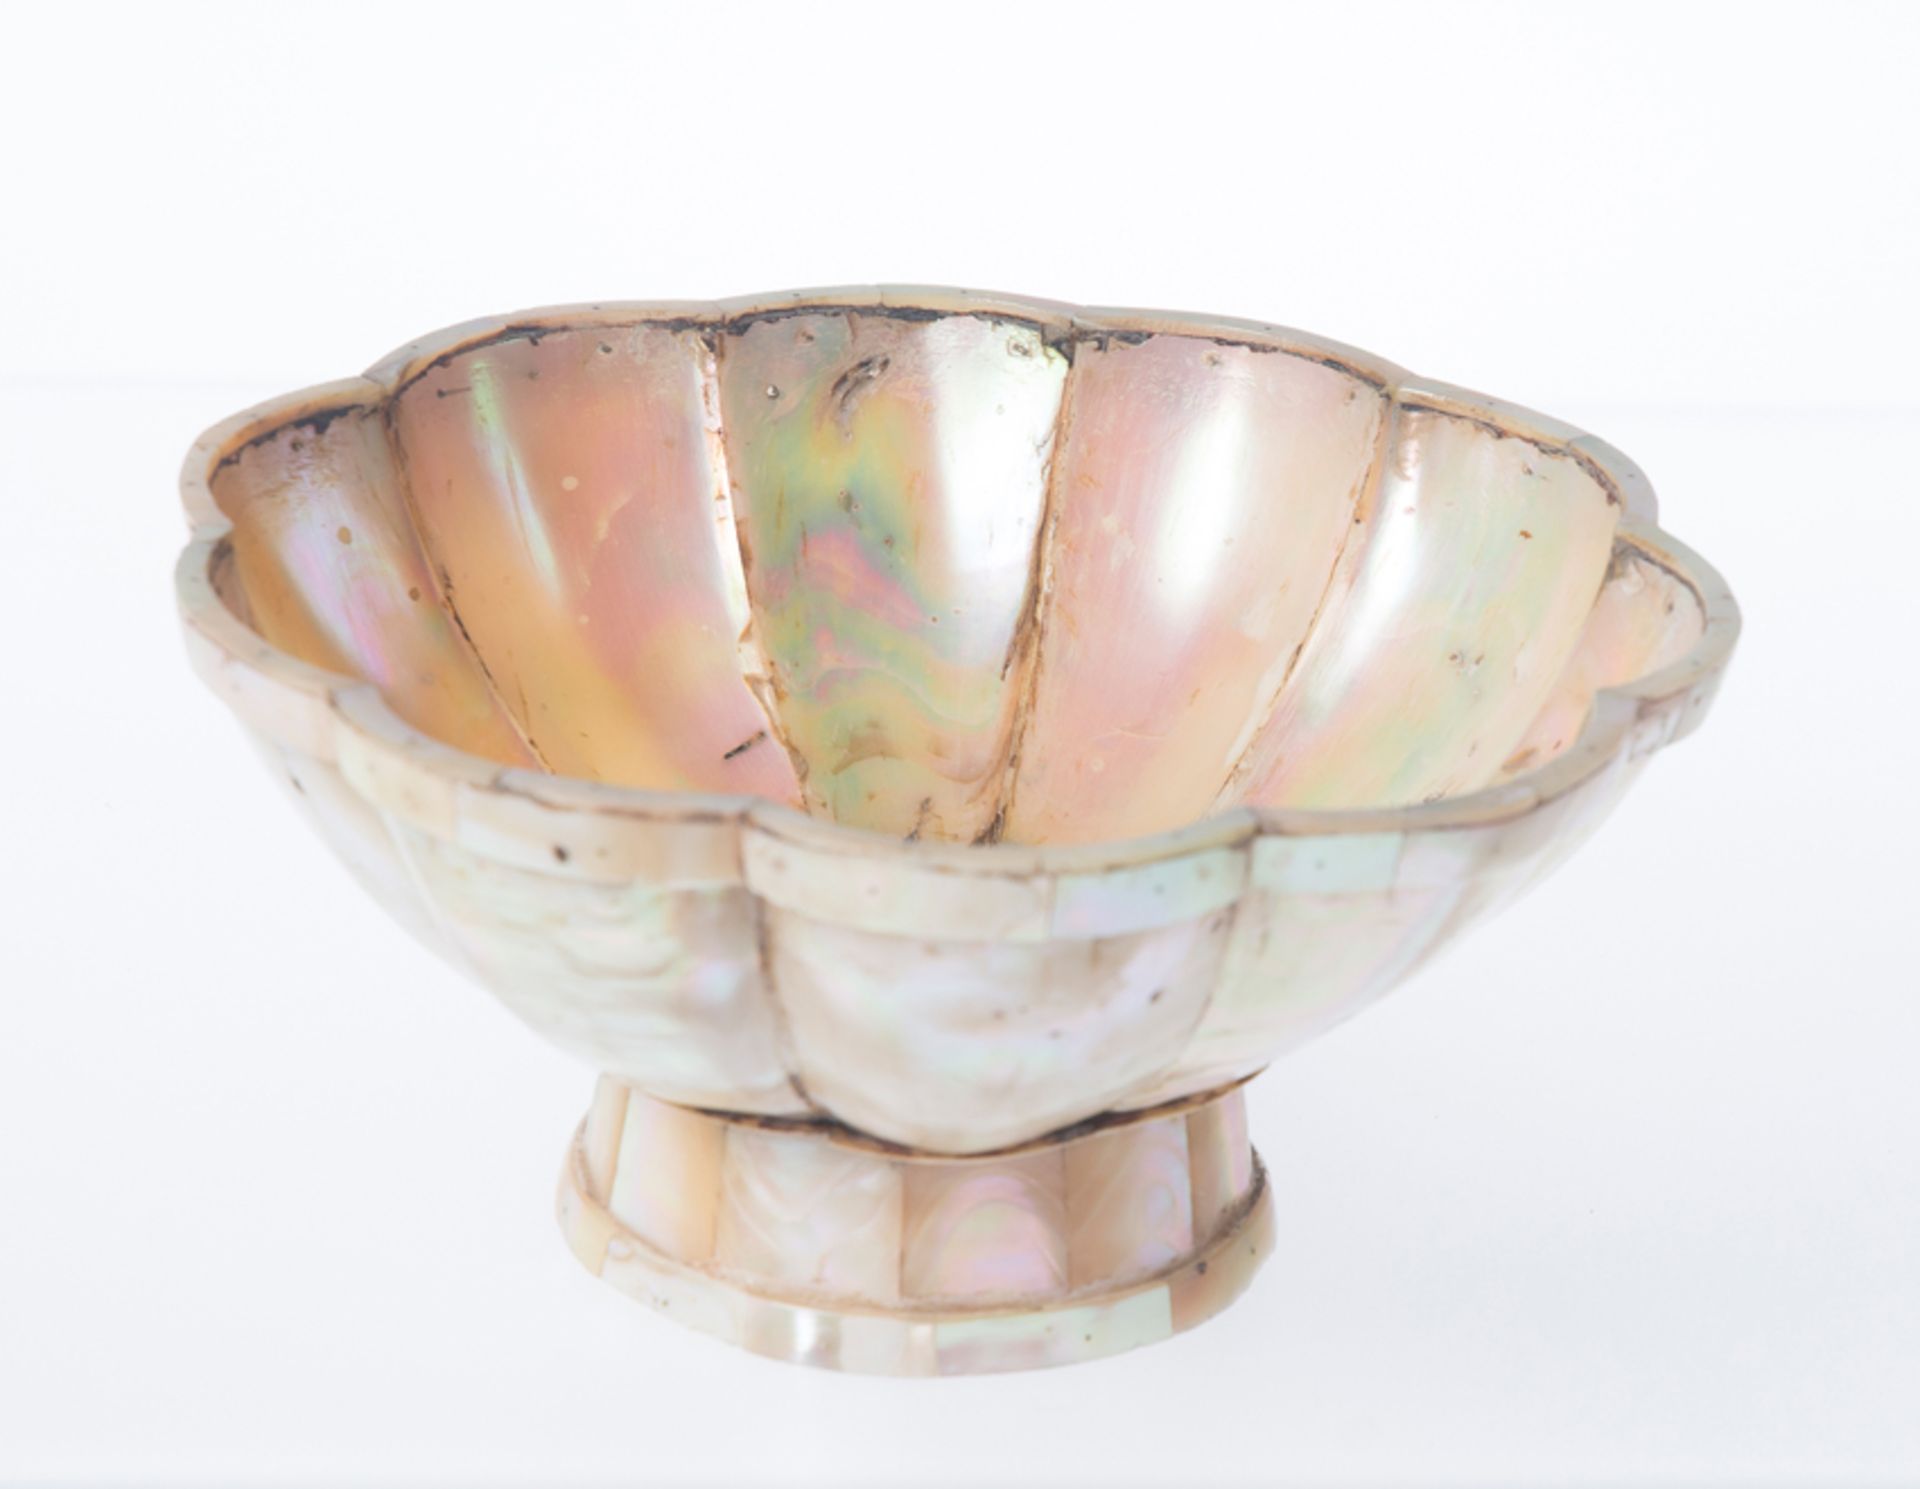 Mother of pearl bowl. Gujarat. India. 19th century.